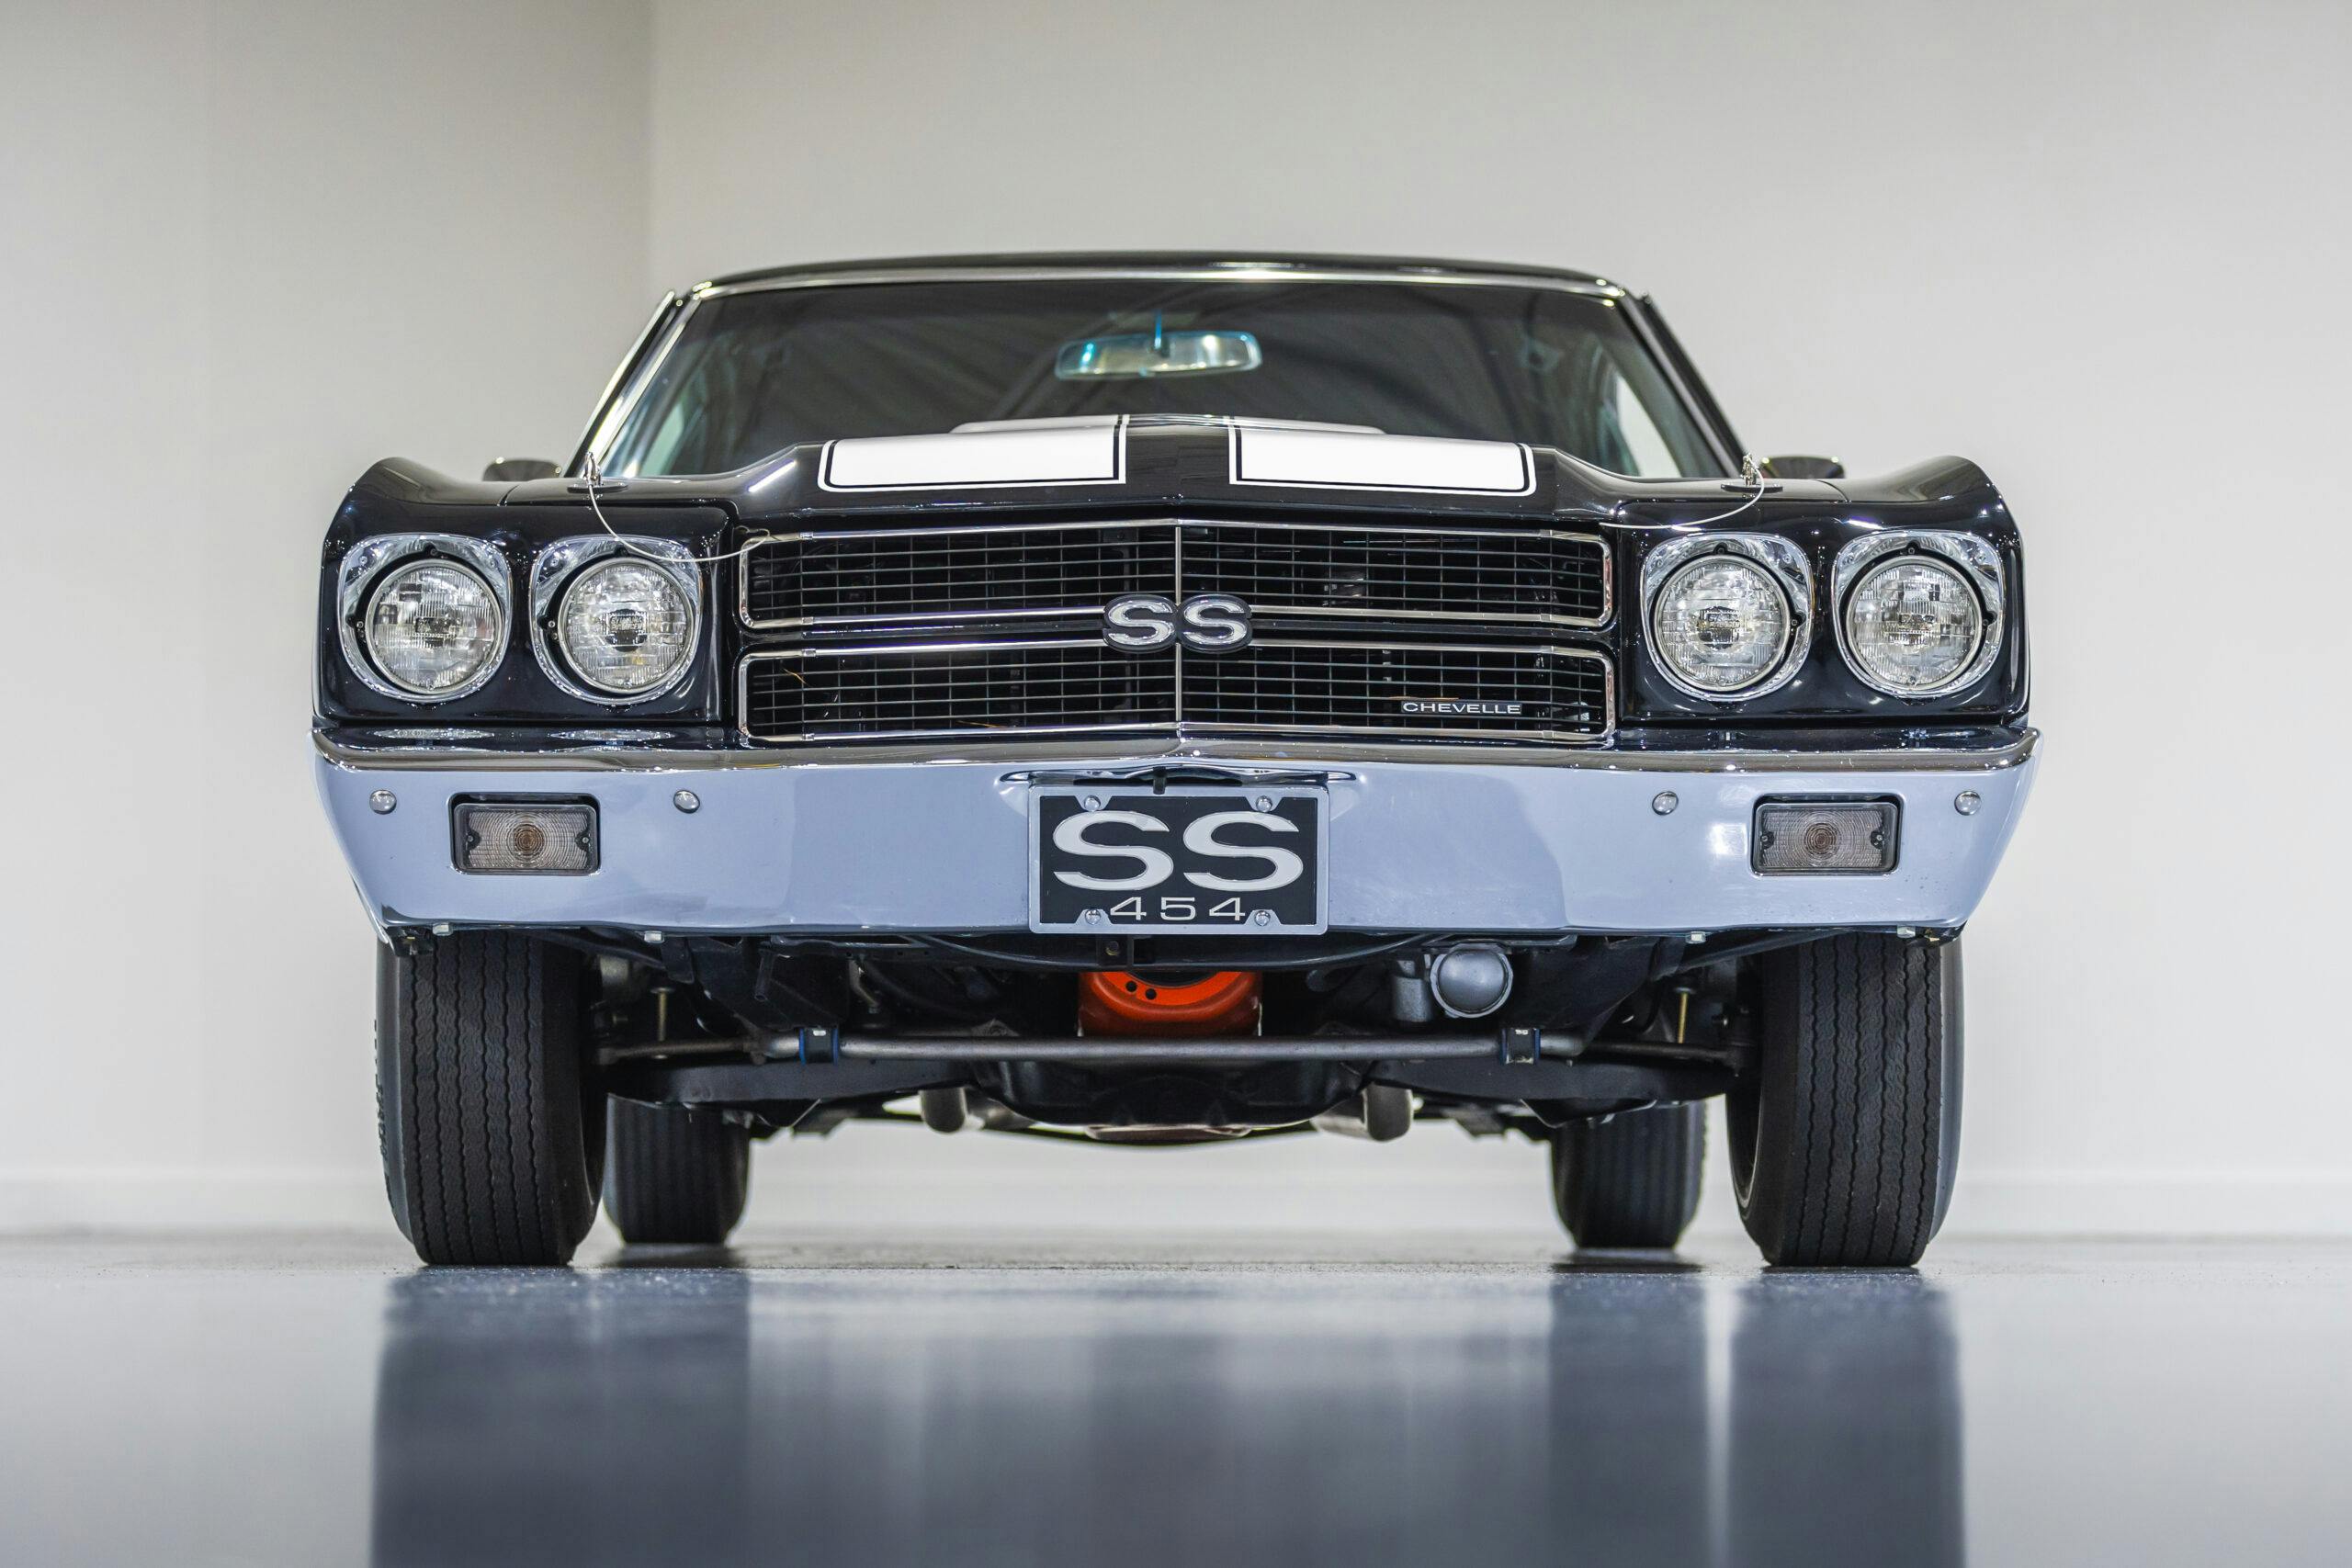 Chevrolet Chevelle front low angle